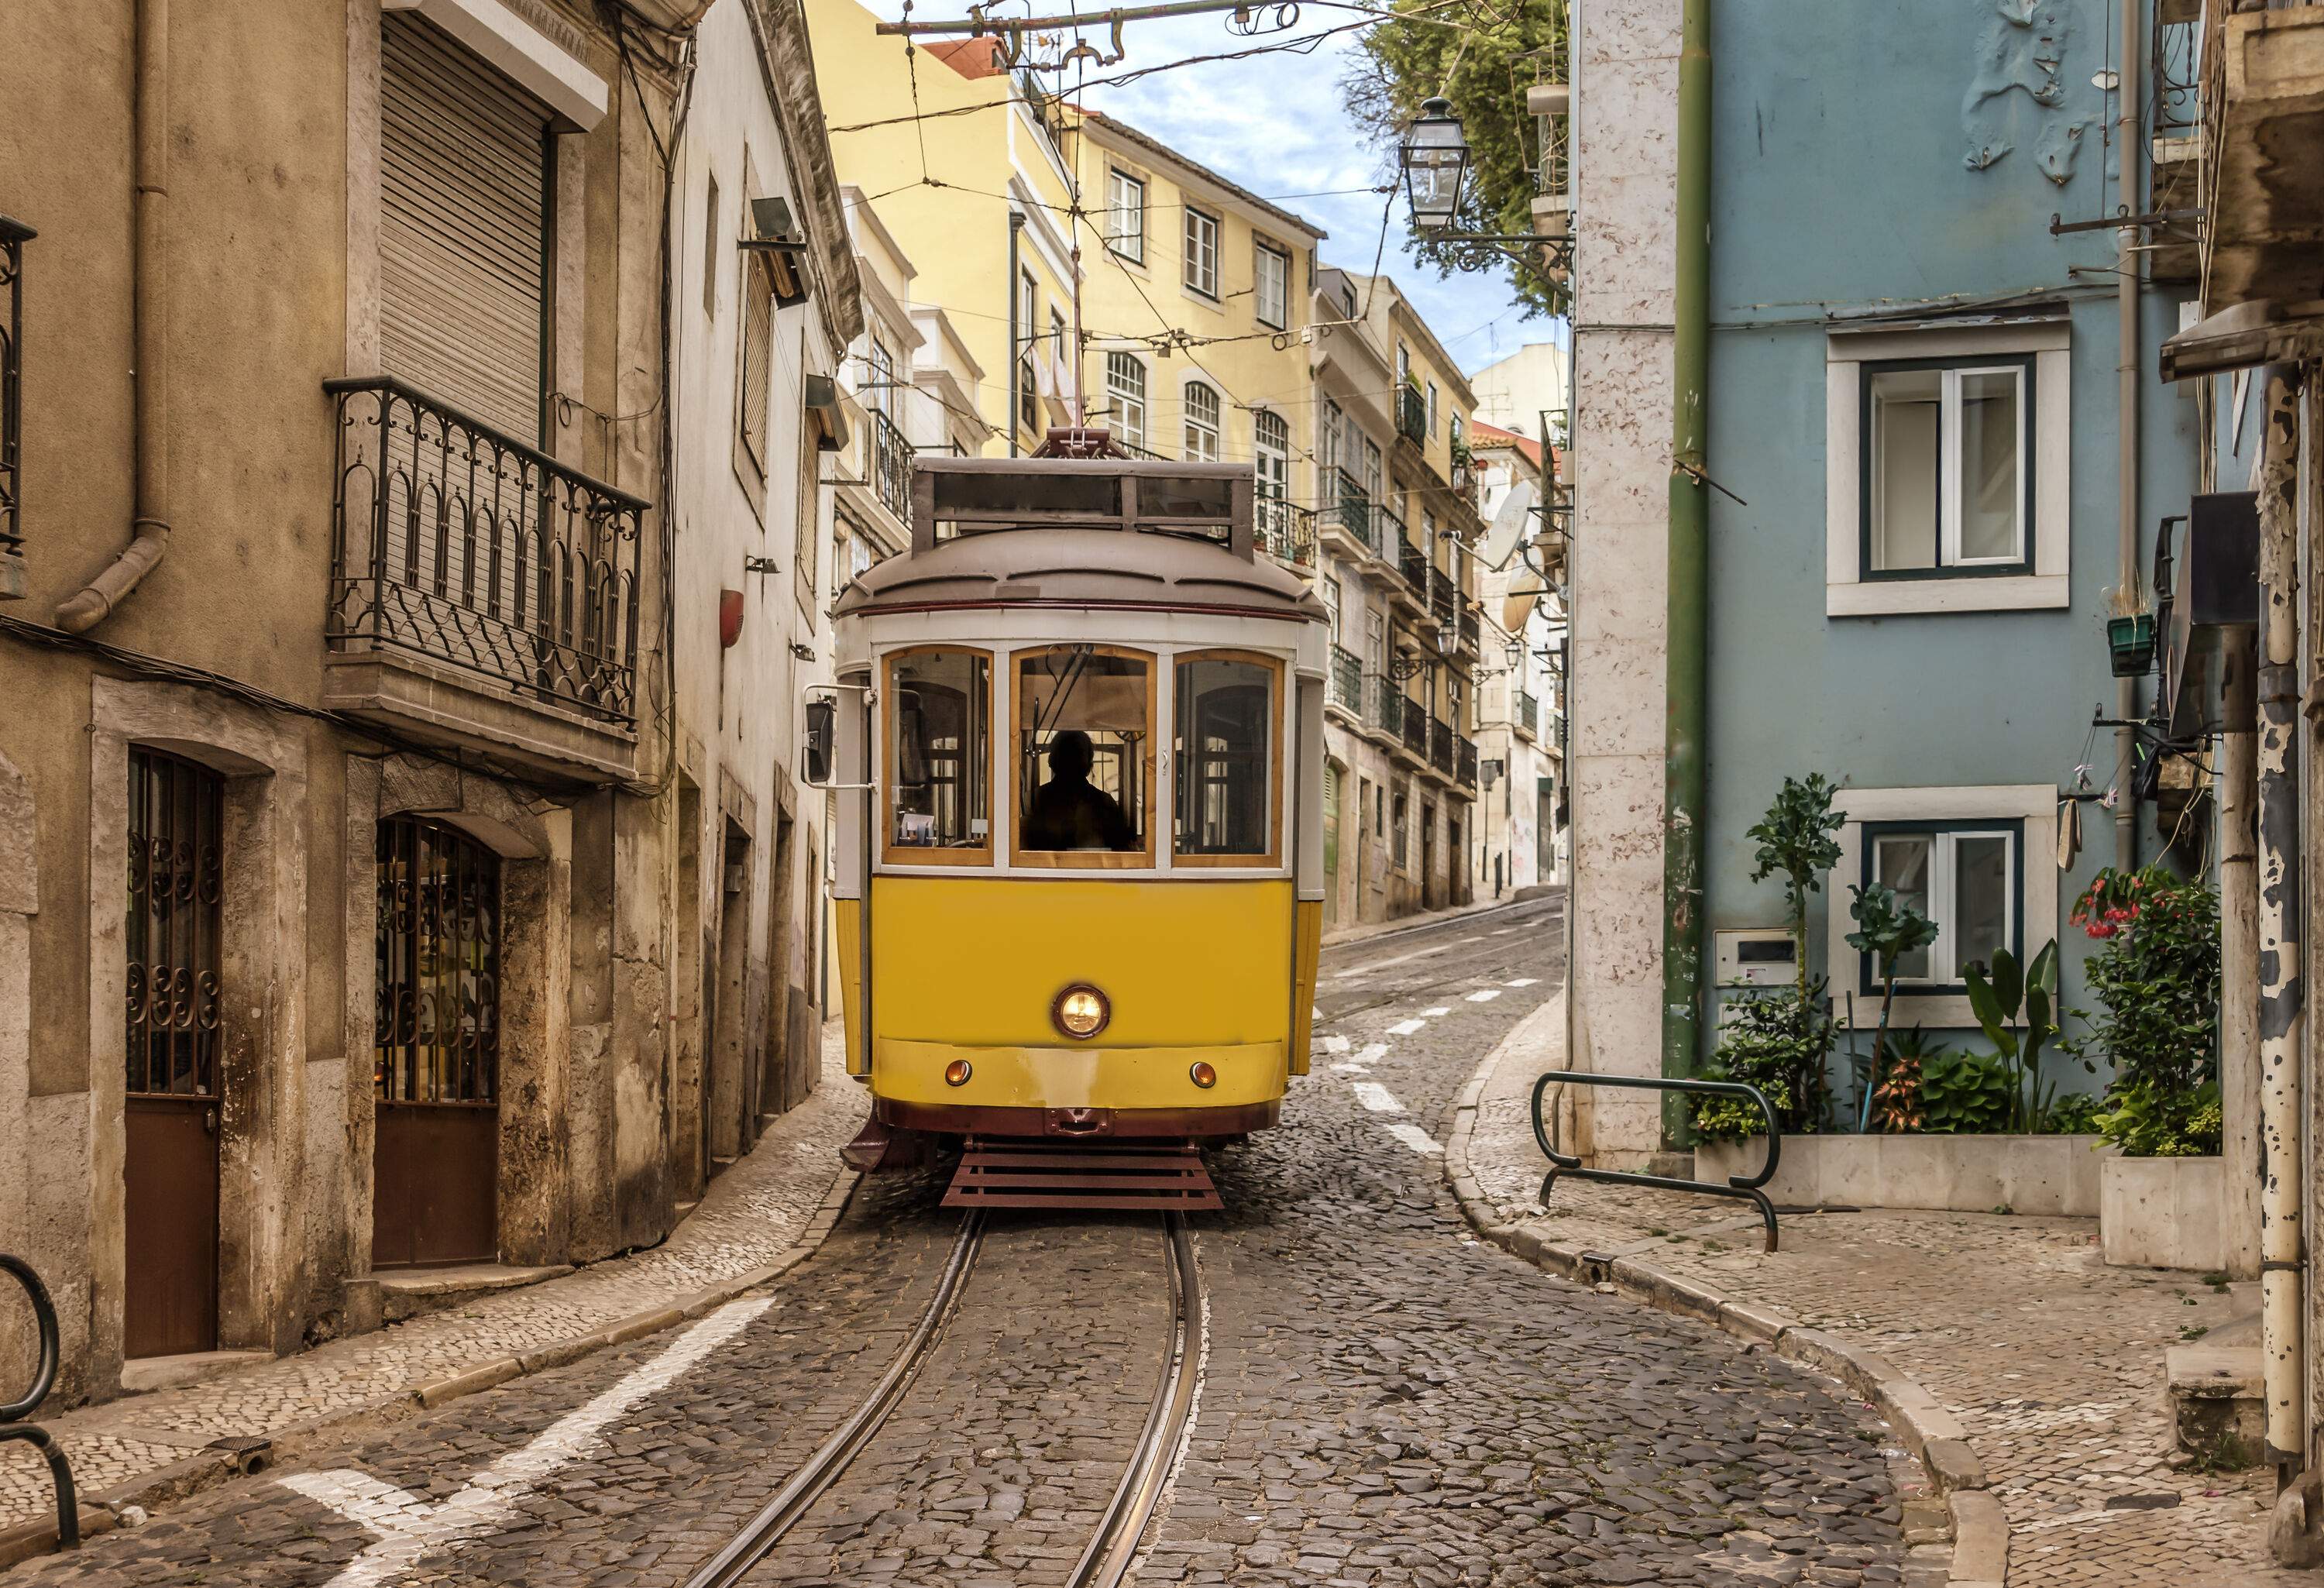 A vintage tram passing through a narrow lane surrounded by historic buildings.